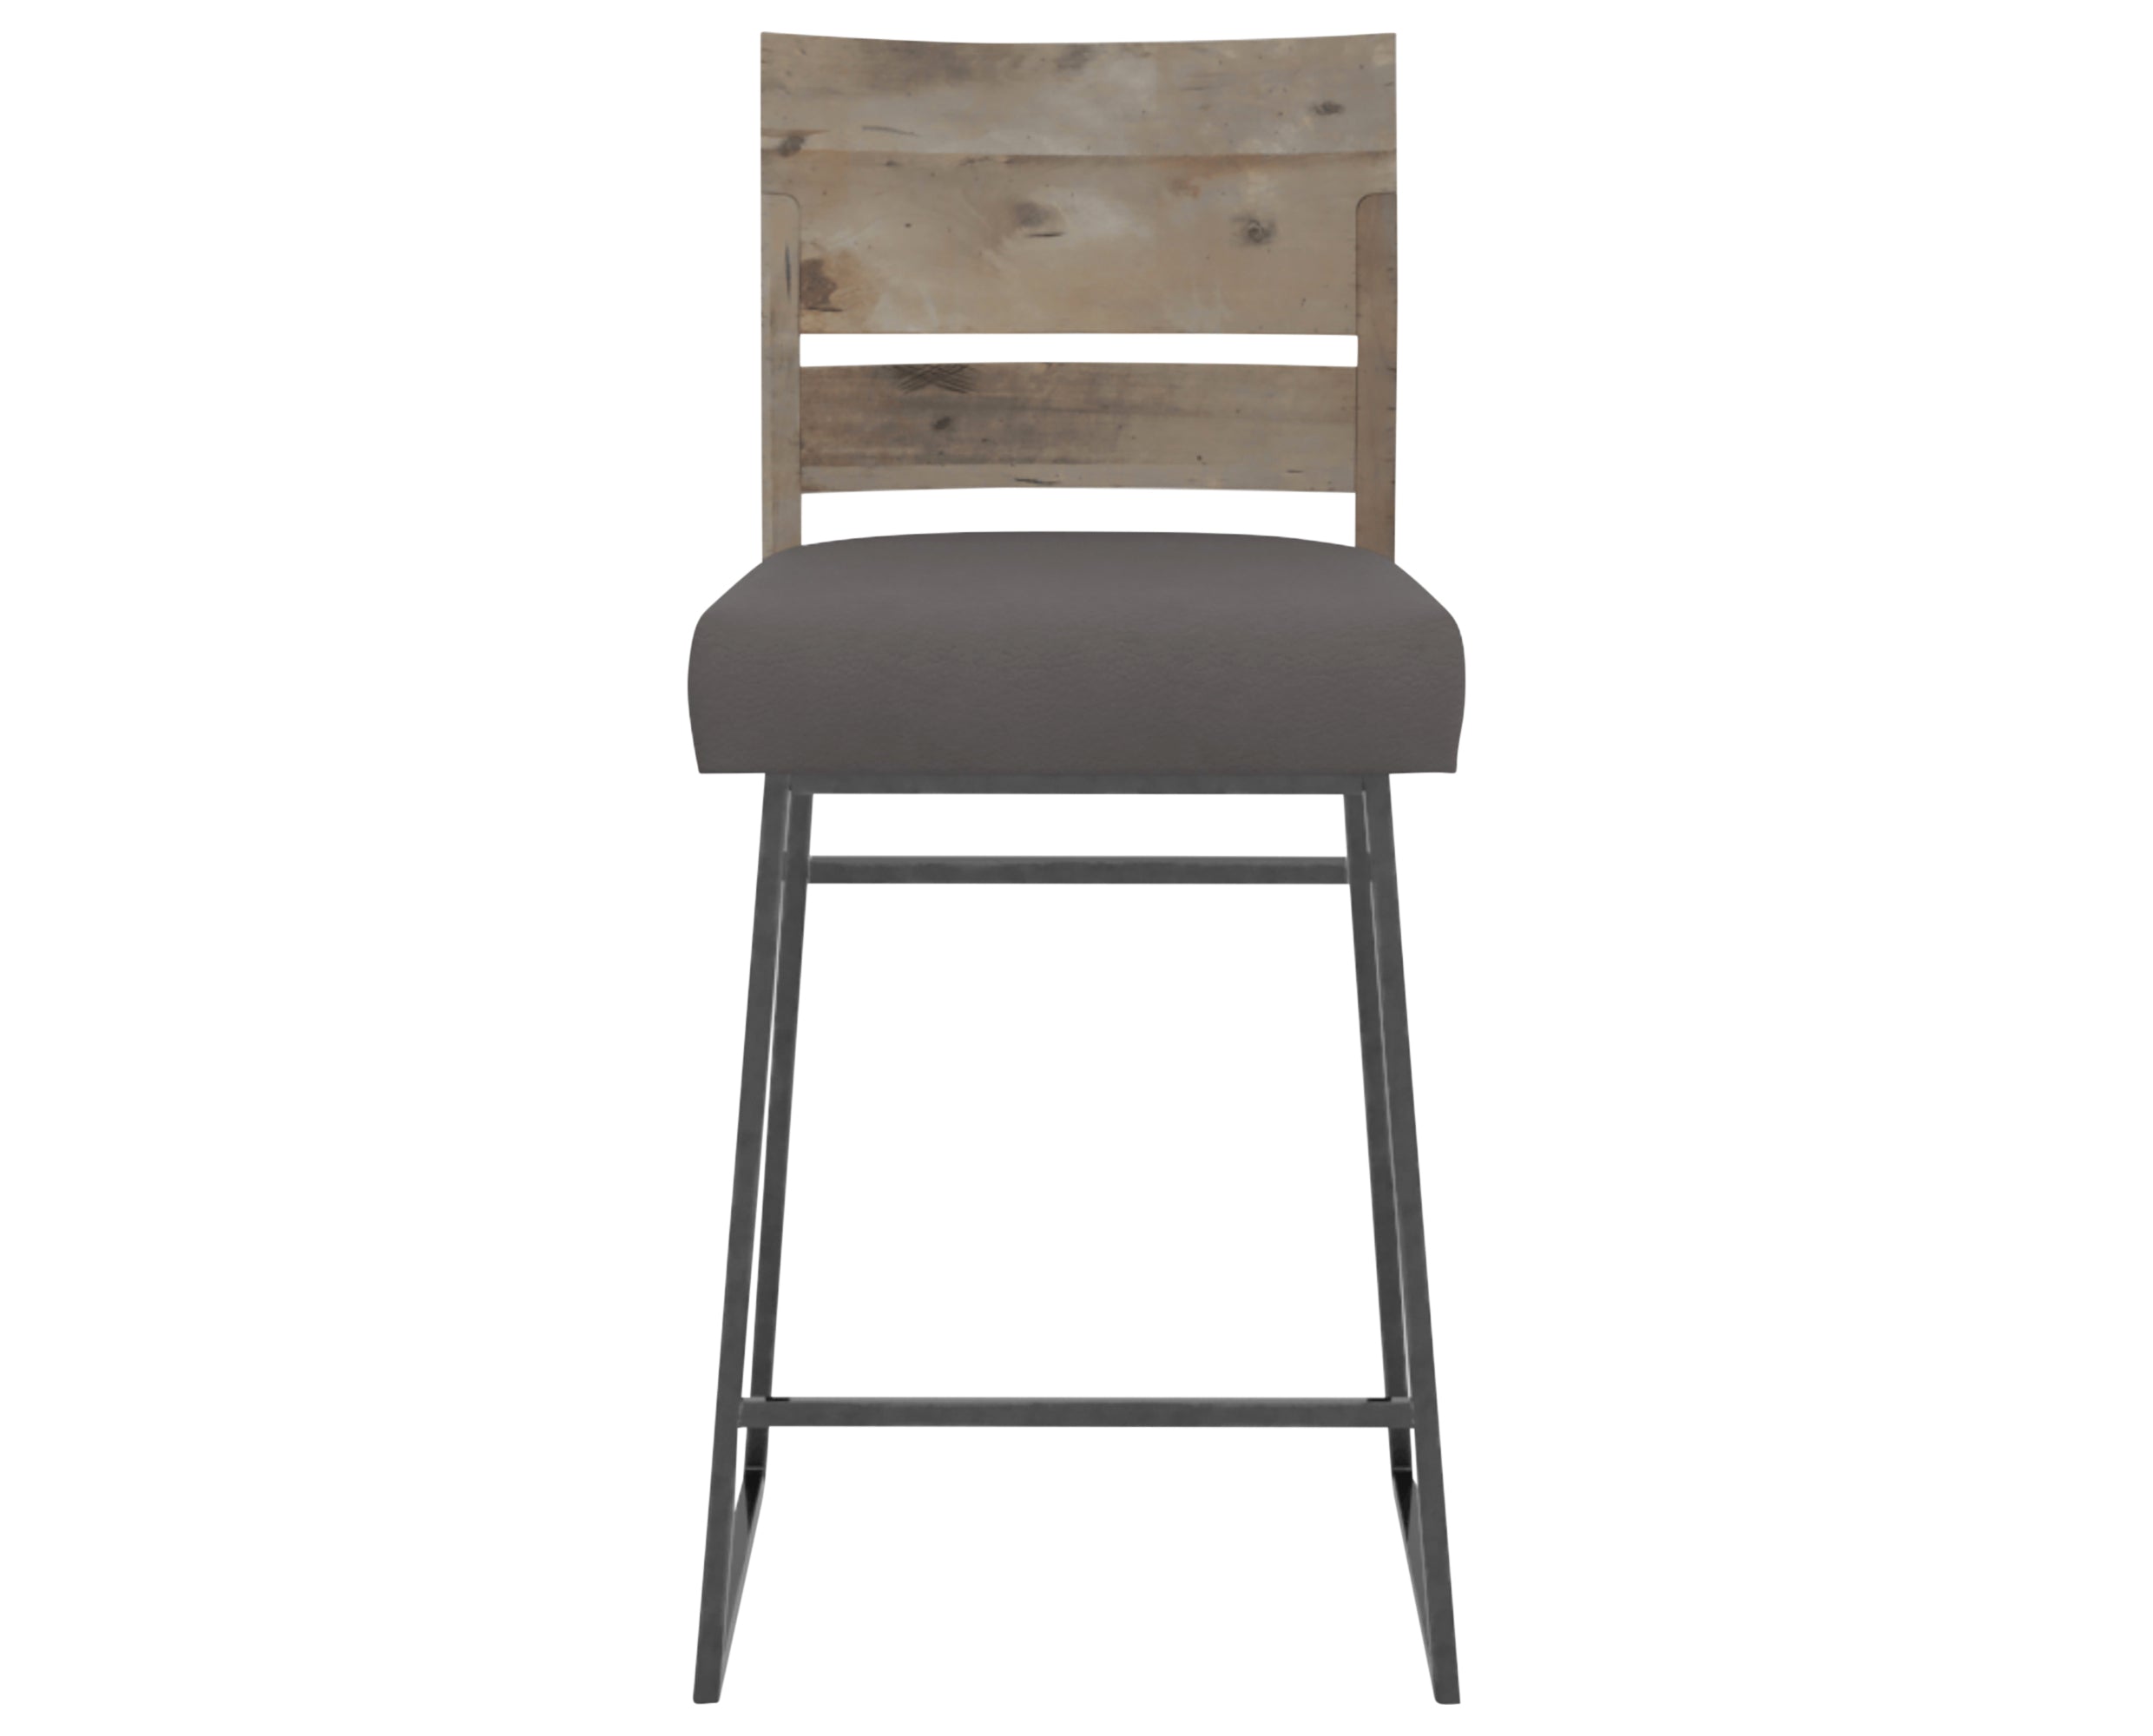 Shadow & Faux Leather XU | Canadel Loft Counter Stool 8149 | Valley Ridge Furniture